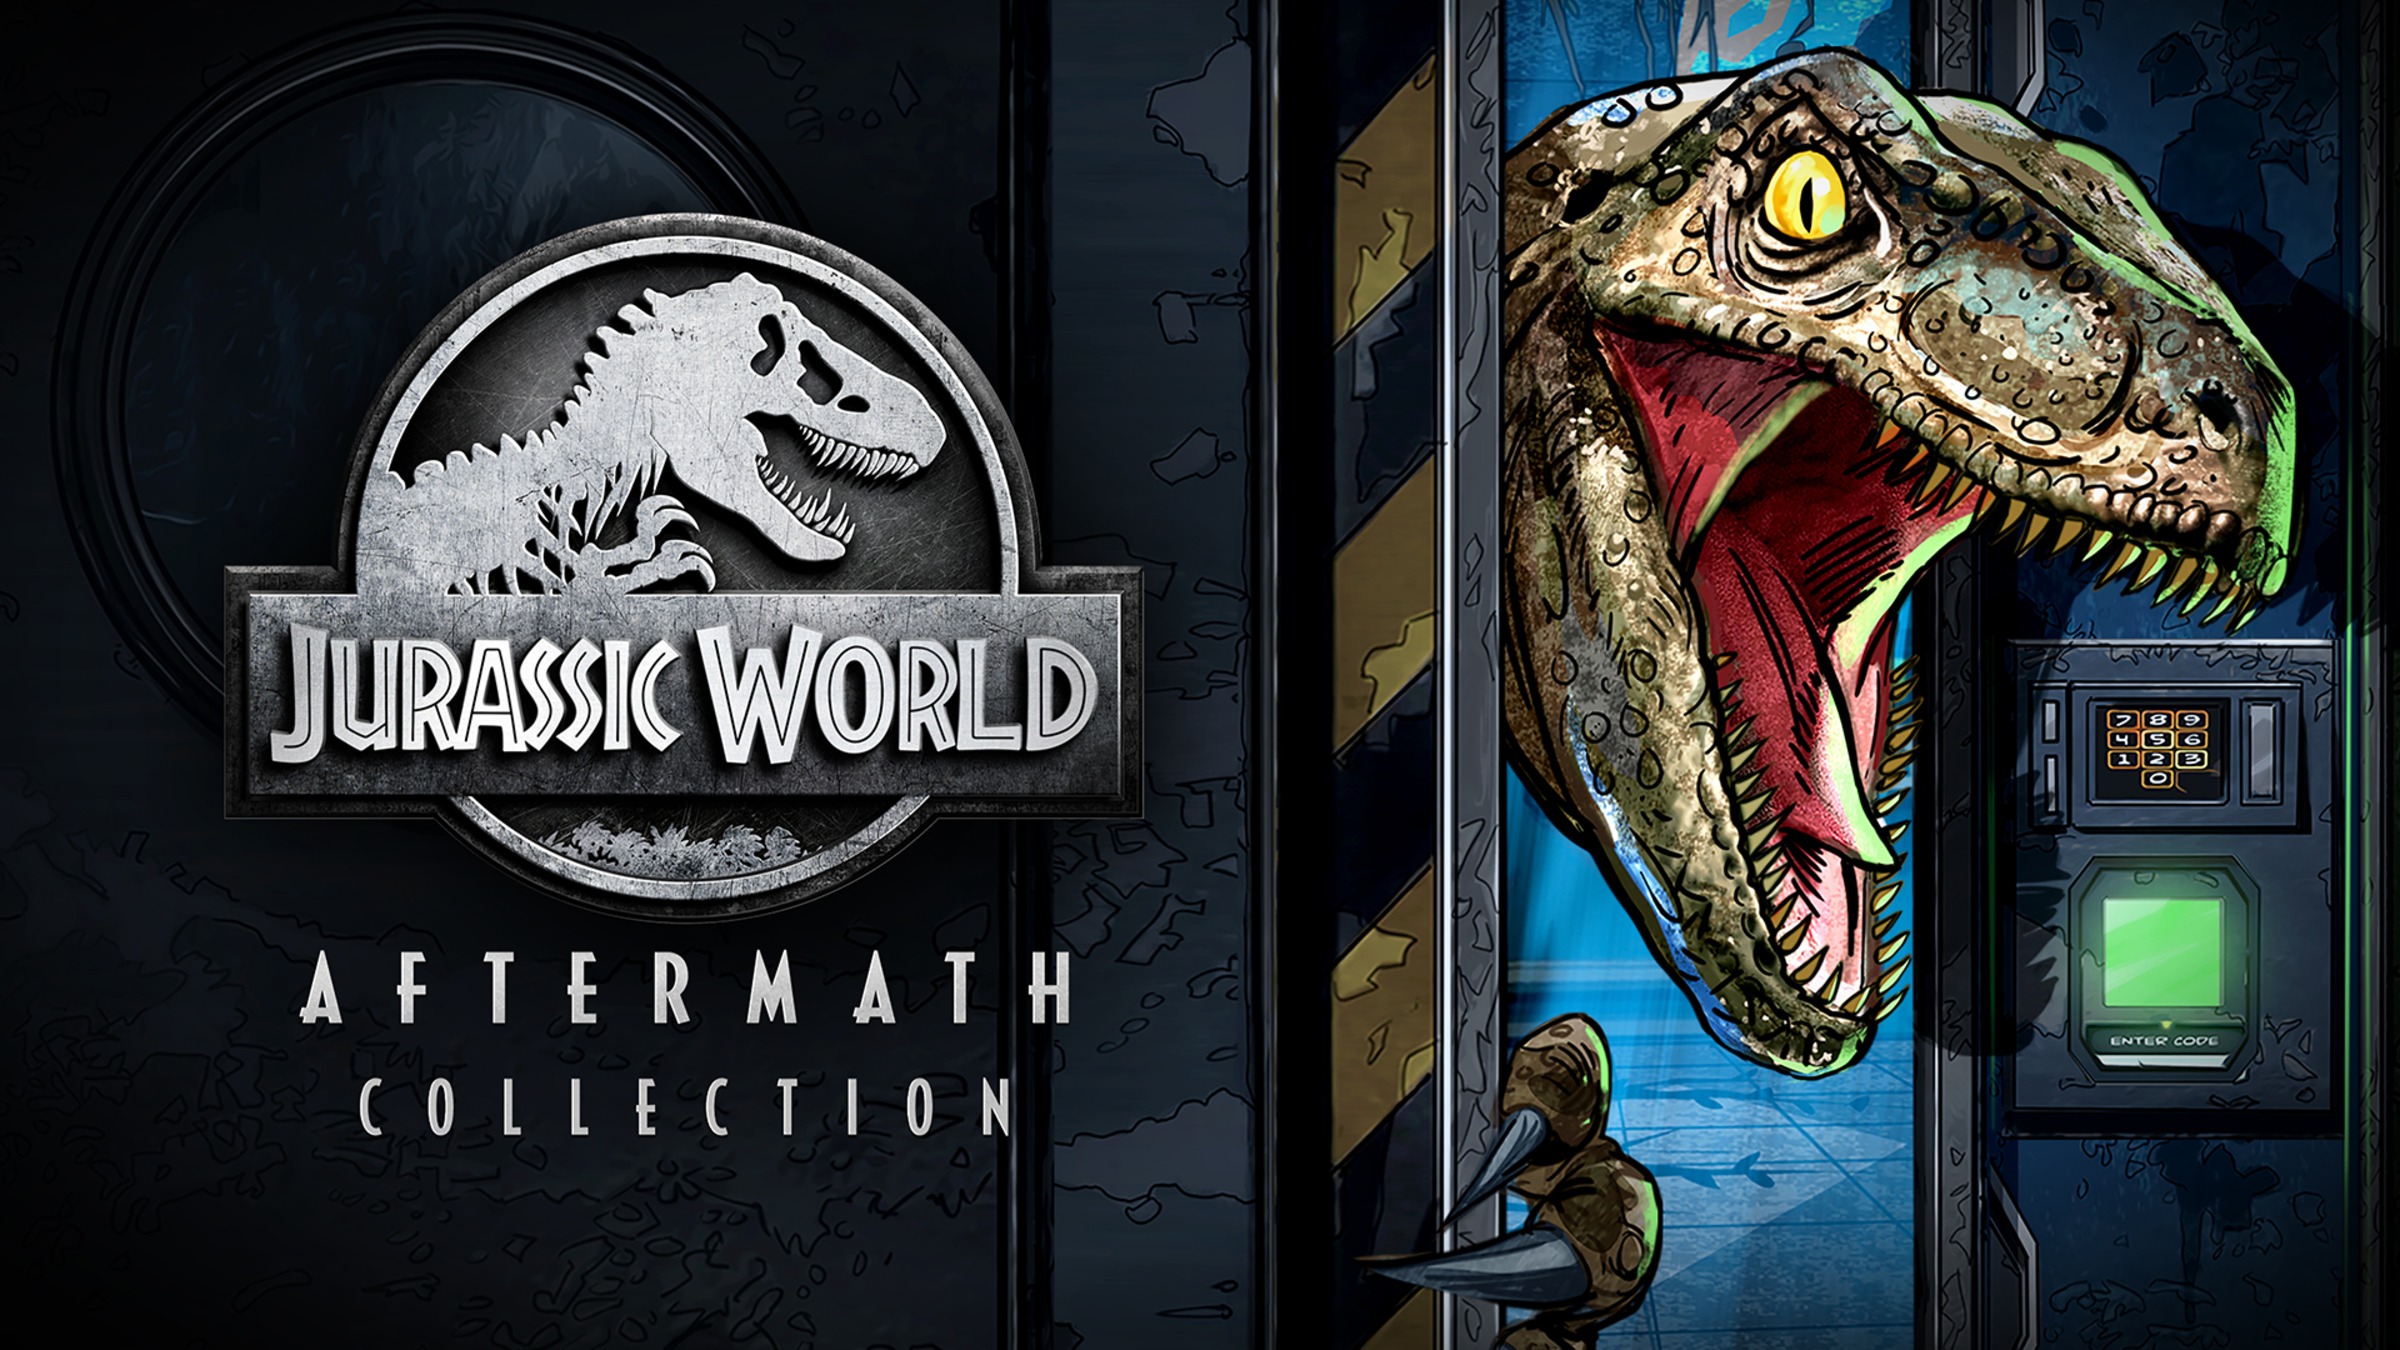 Jurassic World Aftermath Collection  (Nintendo Switch Digital Download) $15